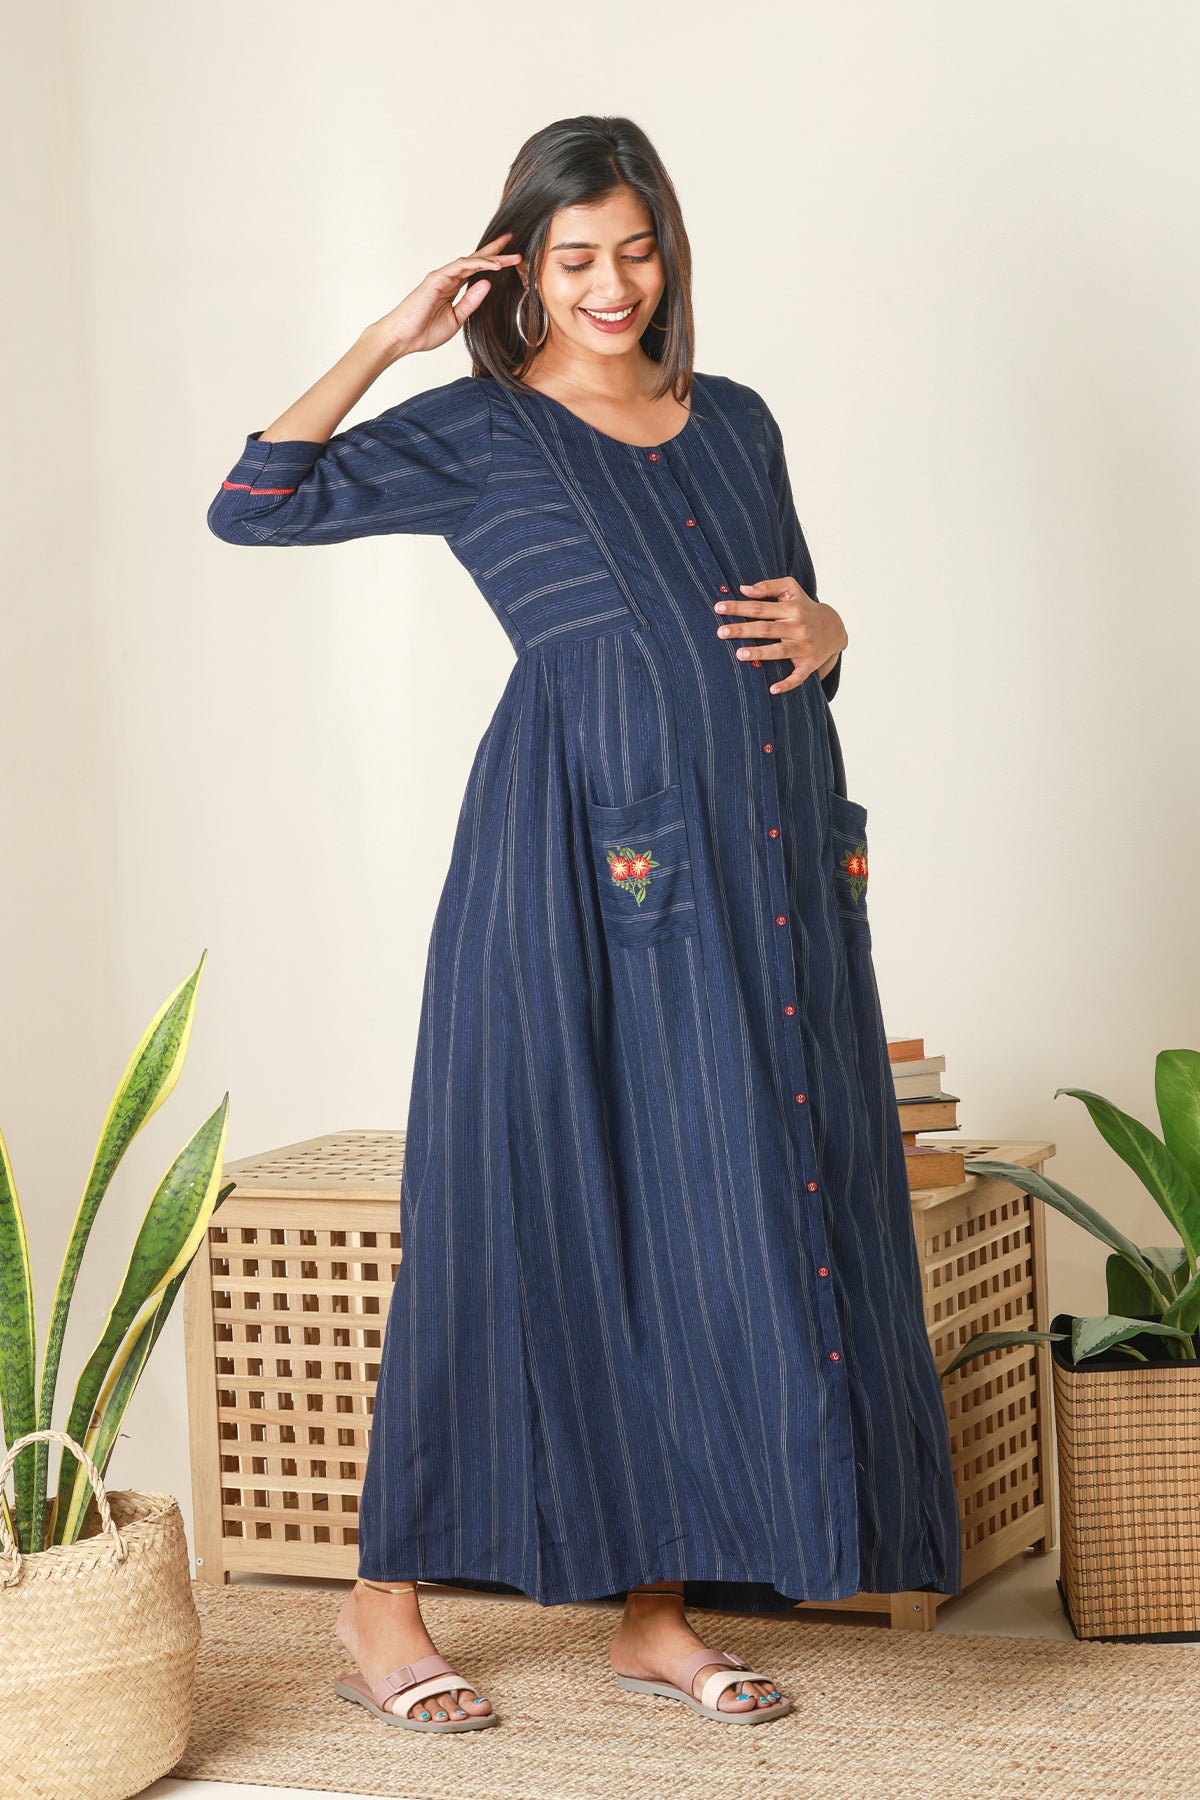 Textured Striped Maternity Dress with pockets Navy Blue